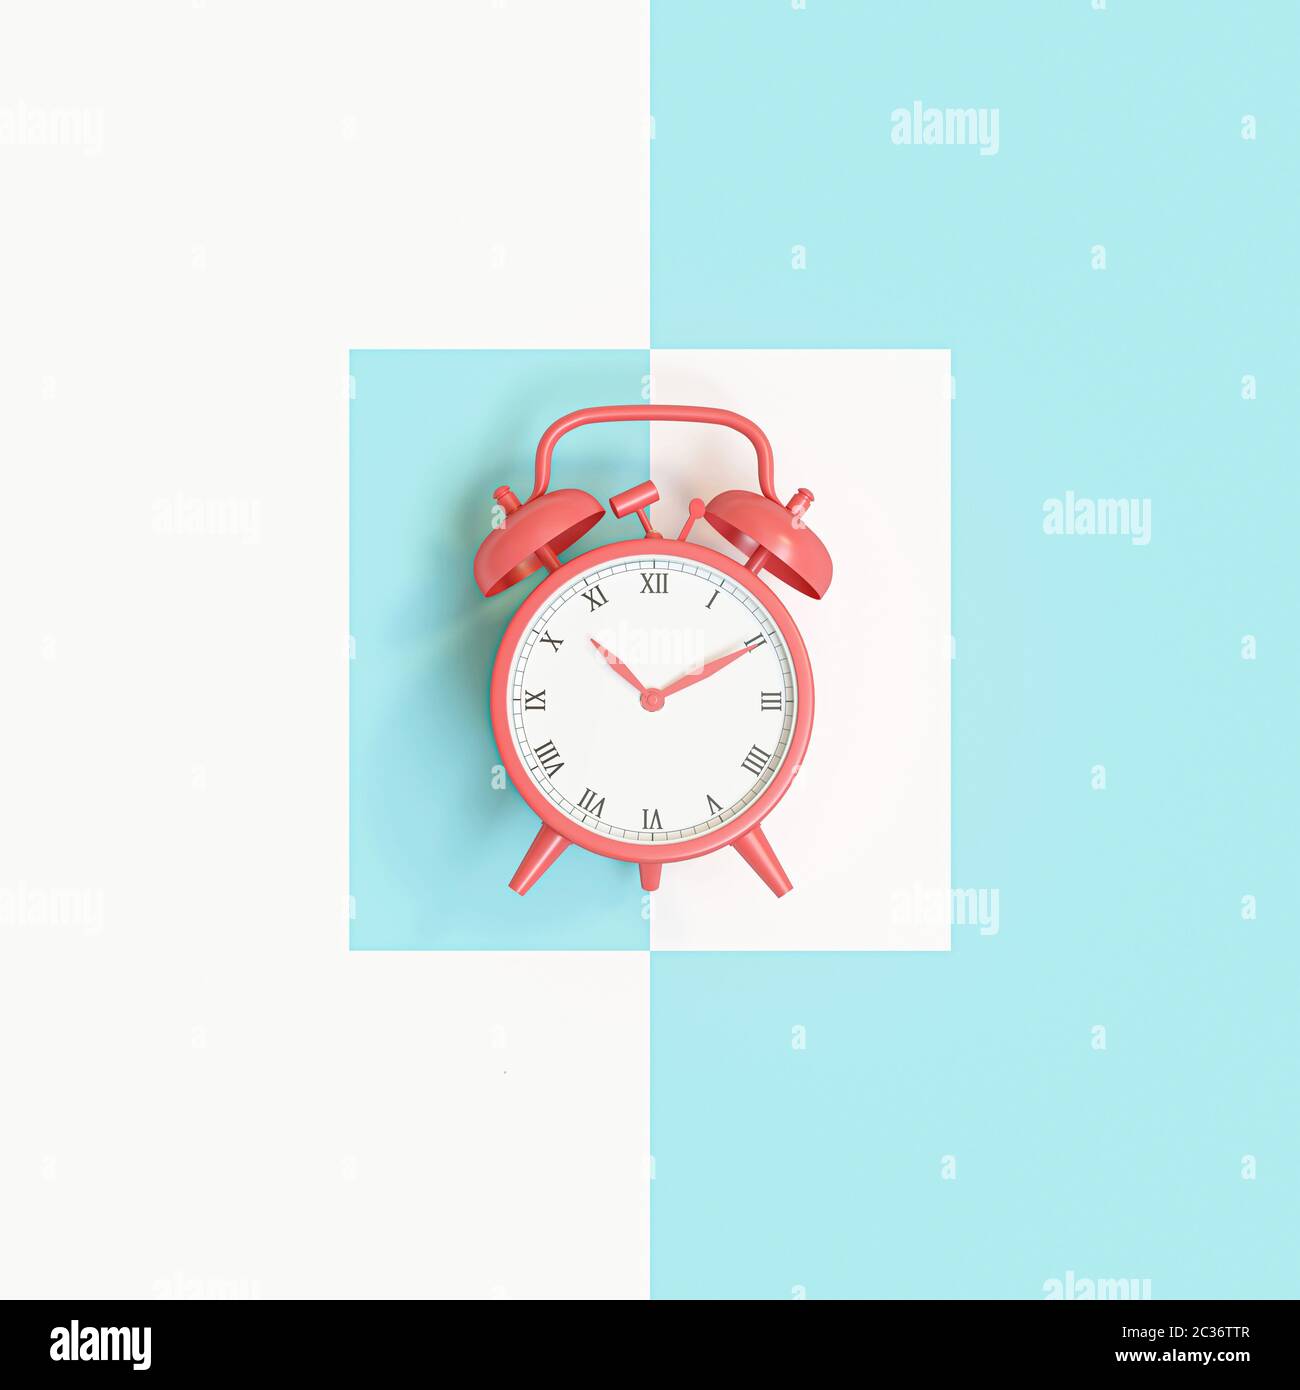 3d image render of a classic coral alarm clock on a blue and white background Stock Photo